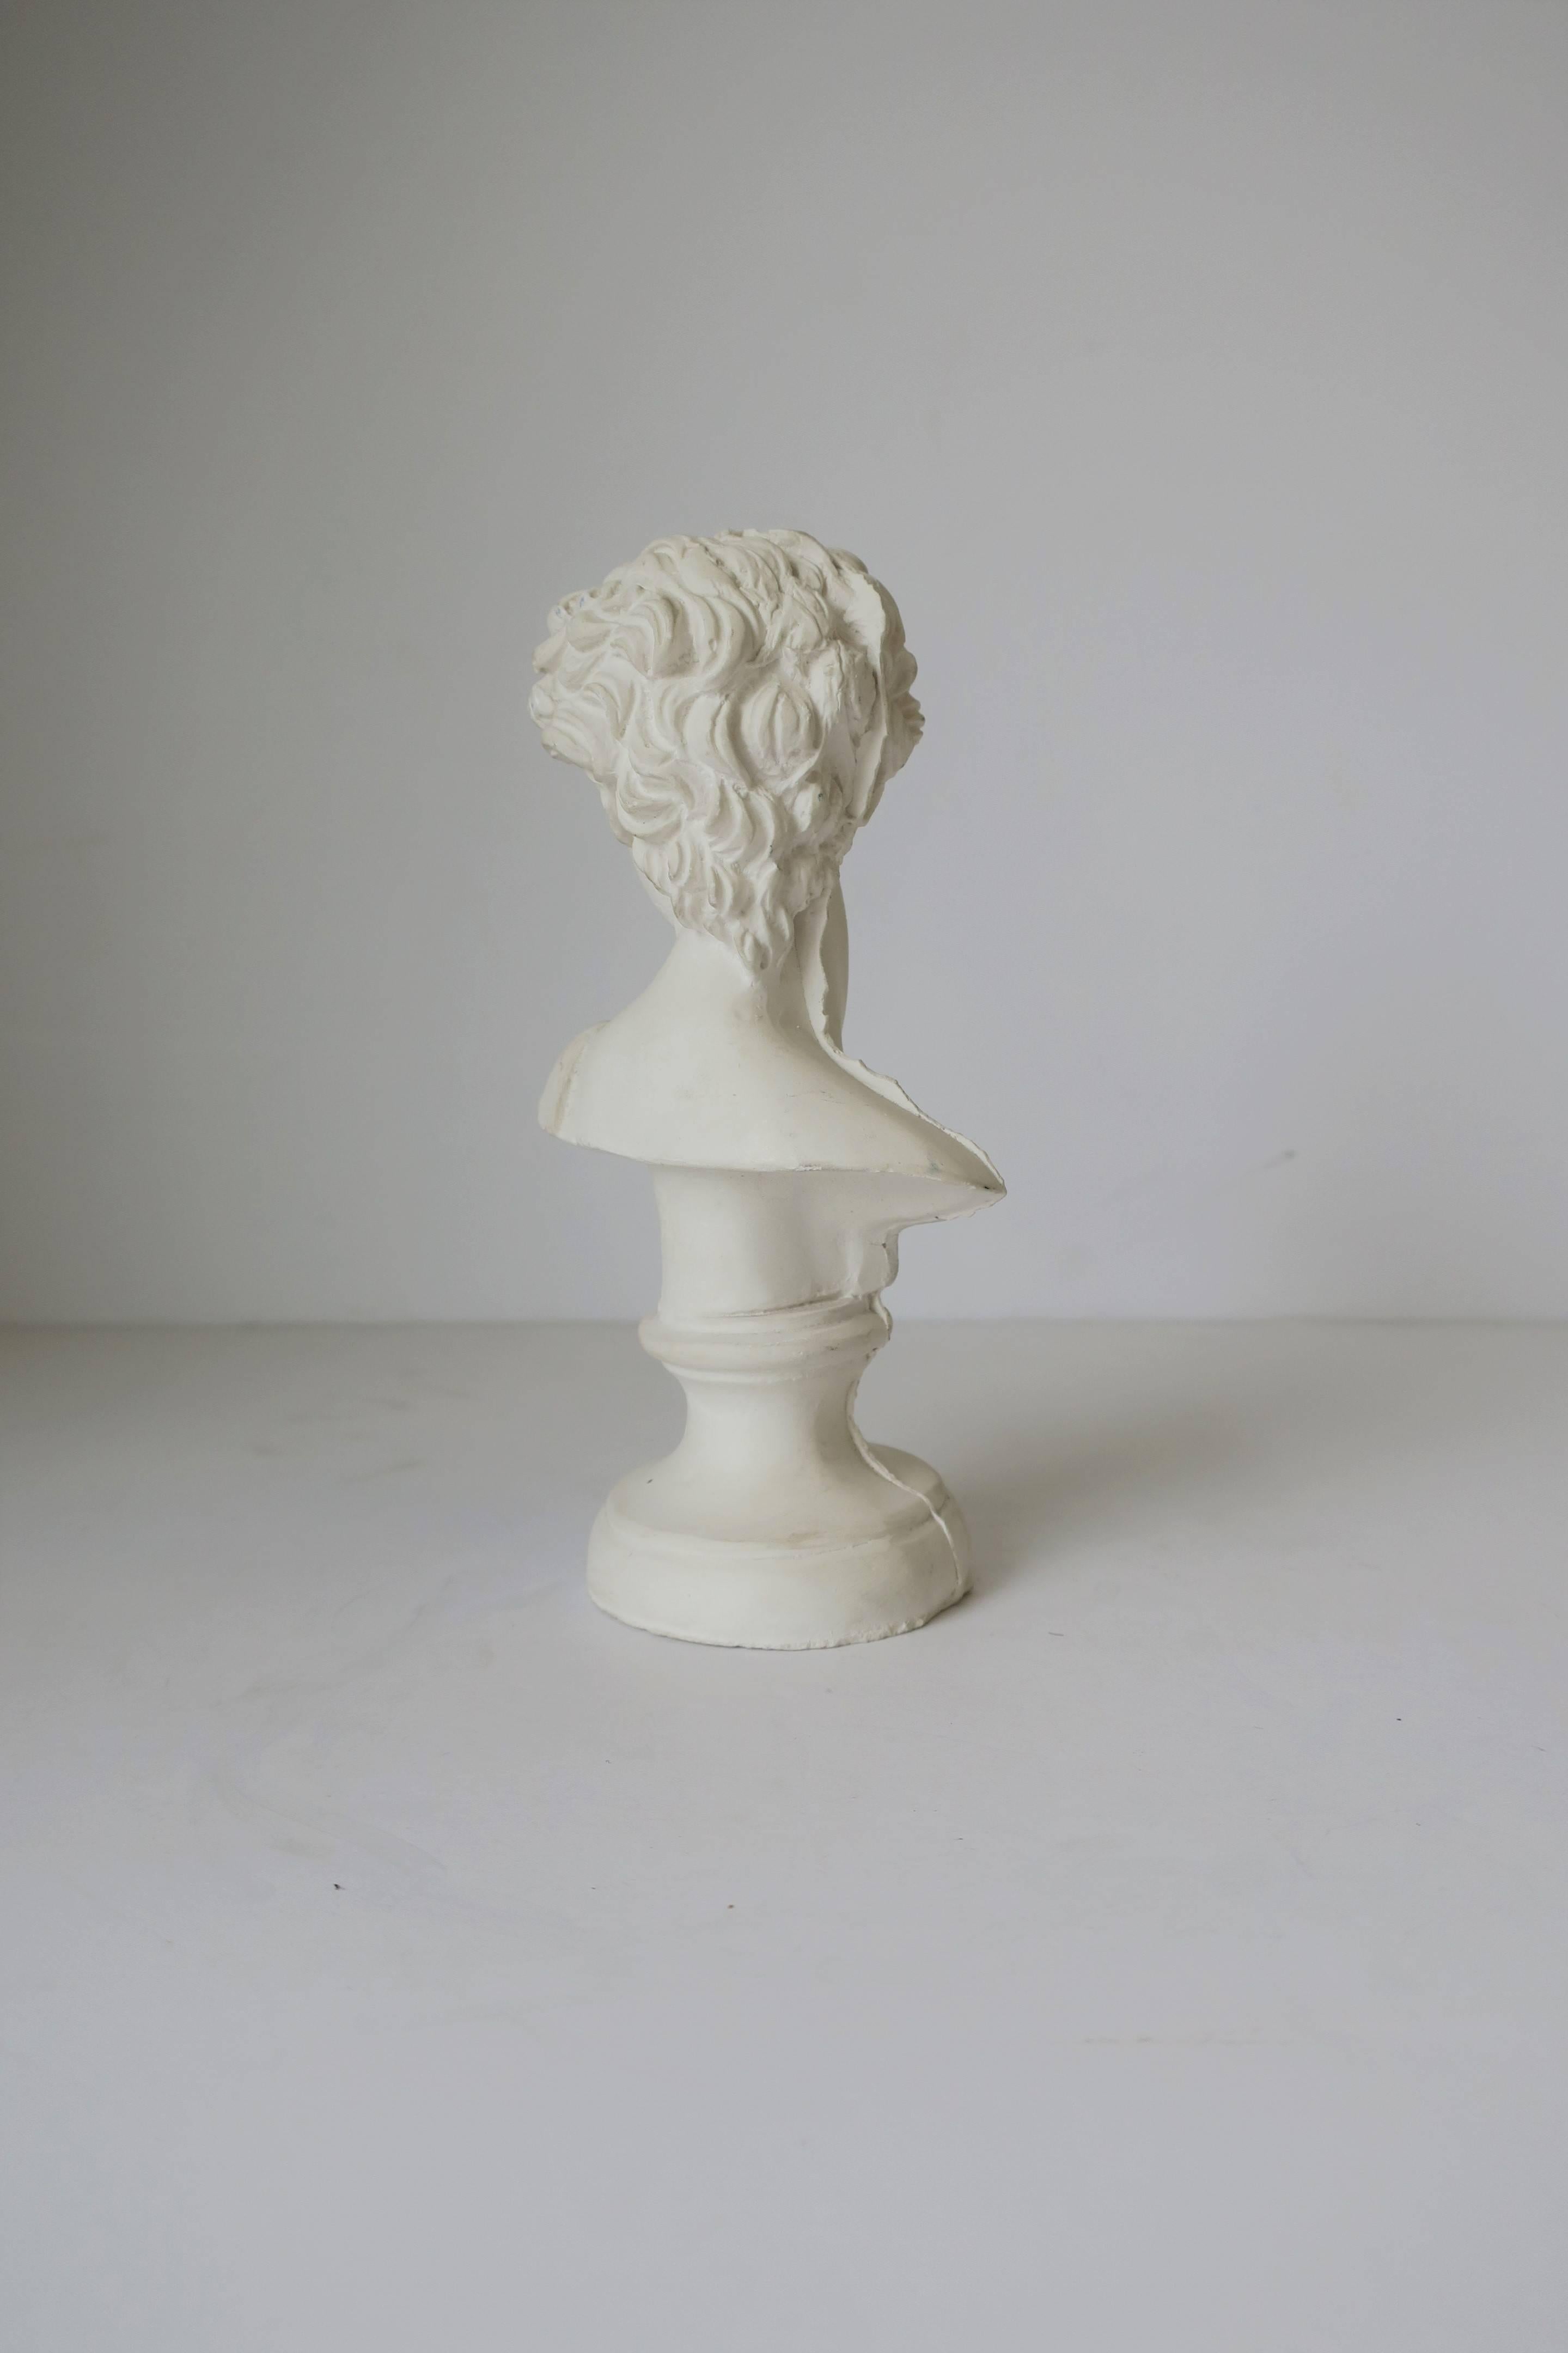 20th Century White Plaster Classical Roman Style Male Bust Sculpture of The David